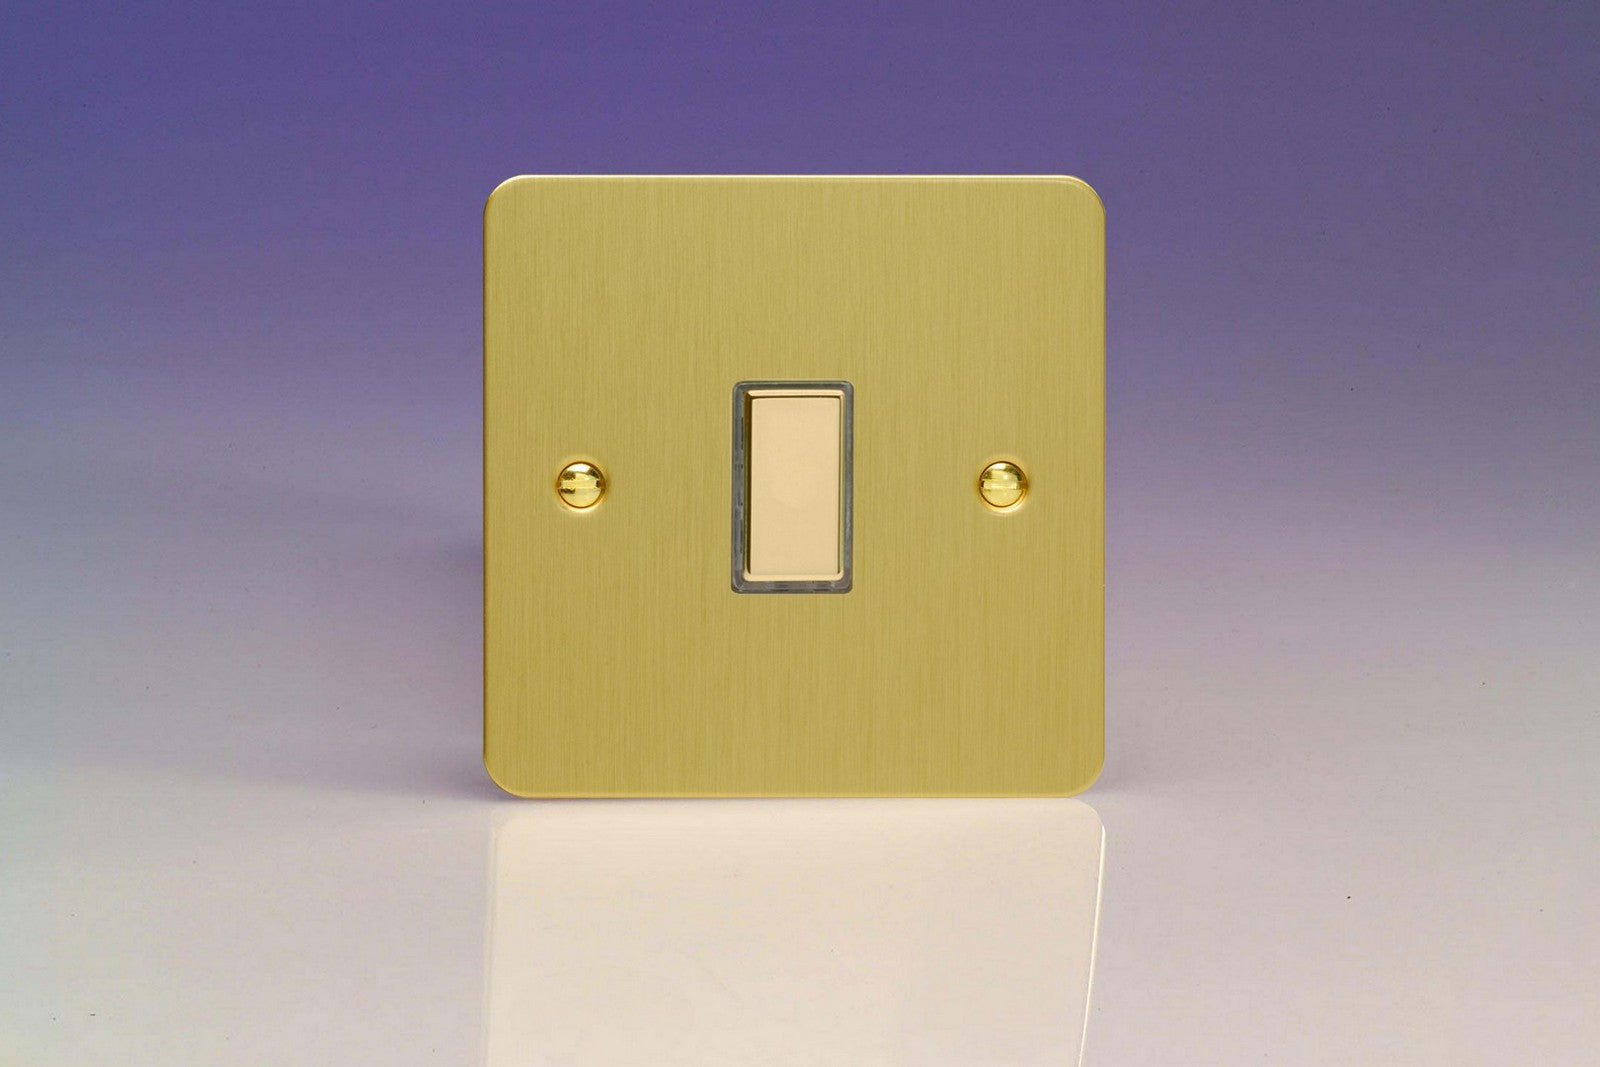 Varilight JFBES001 Ultraflat Brushed Brass 1-Gang Tactile Touch Control Dimming Slave for use with Multi-Point Touch or Remote Master on 2-Way Circuits